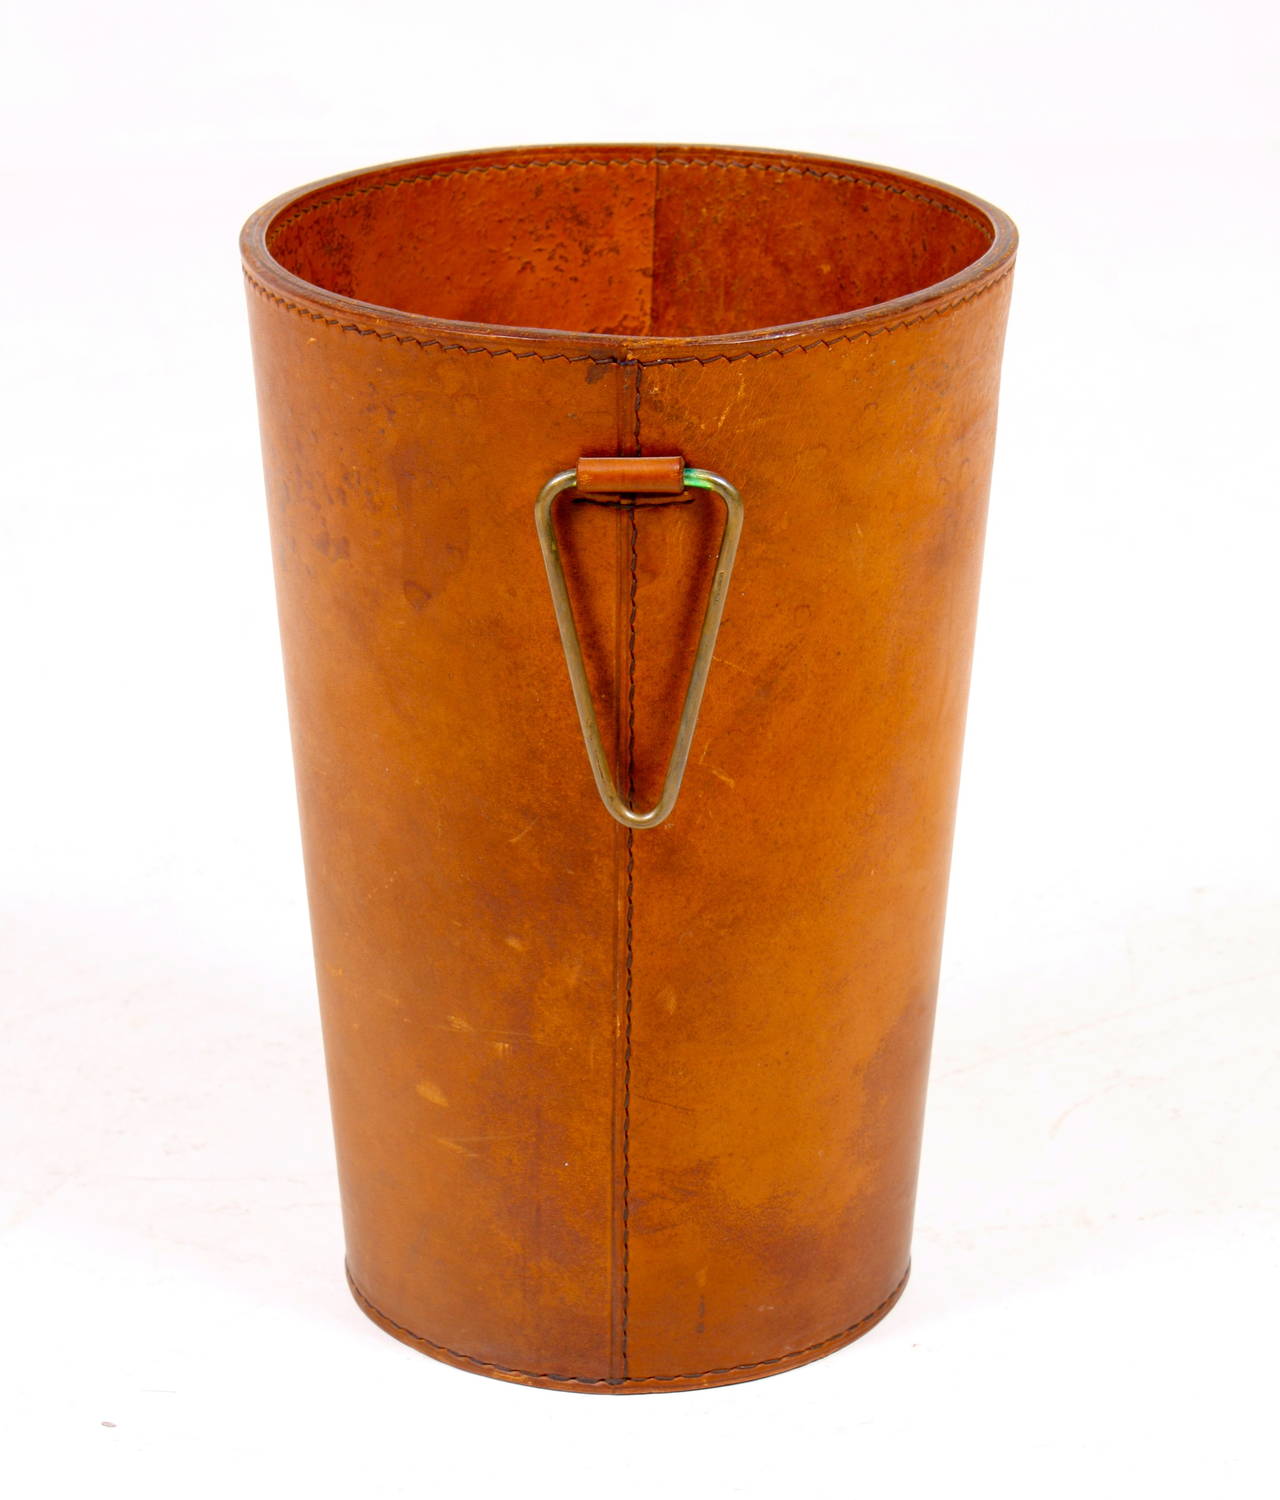 Rare small size waste paper basket in patinated leather by Carl Auböck.
Made in Austria. Great original condition.